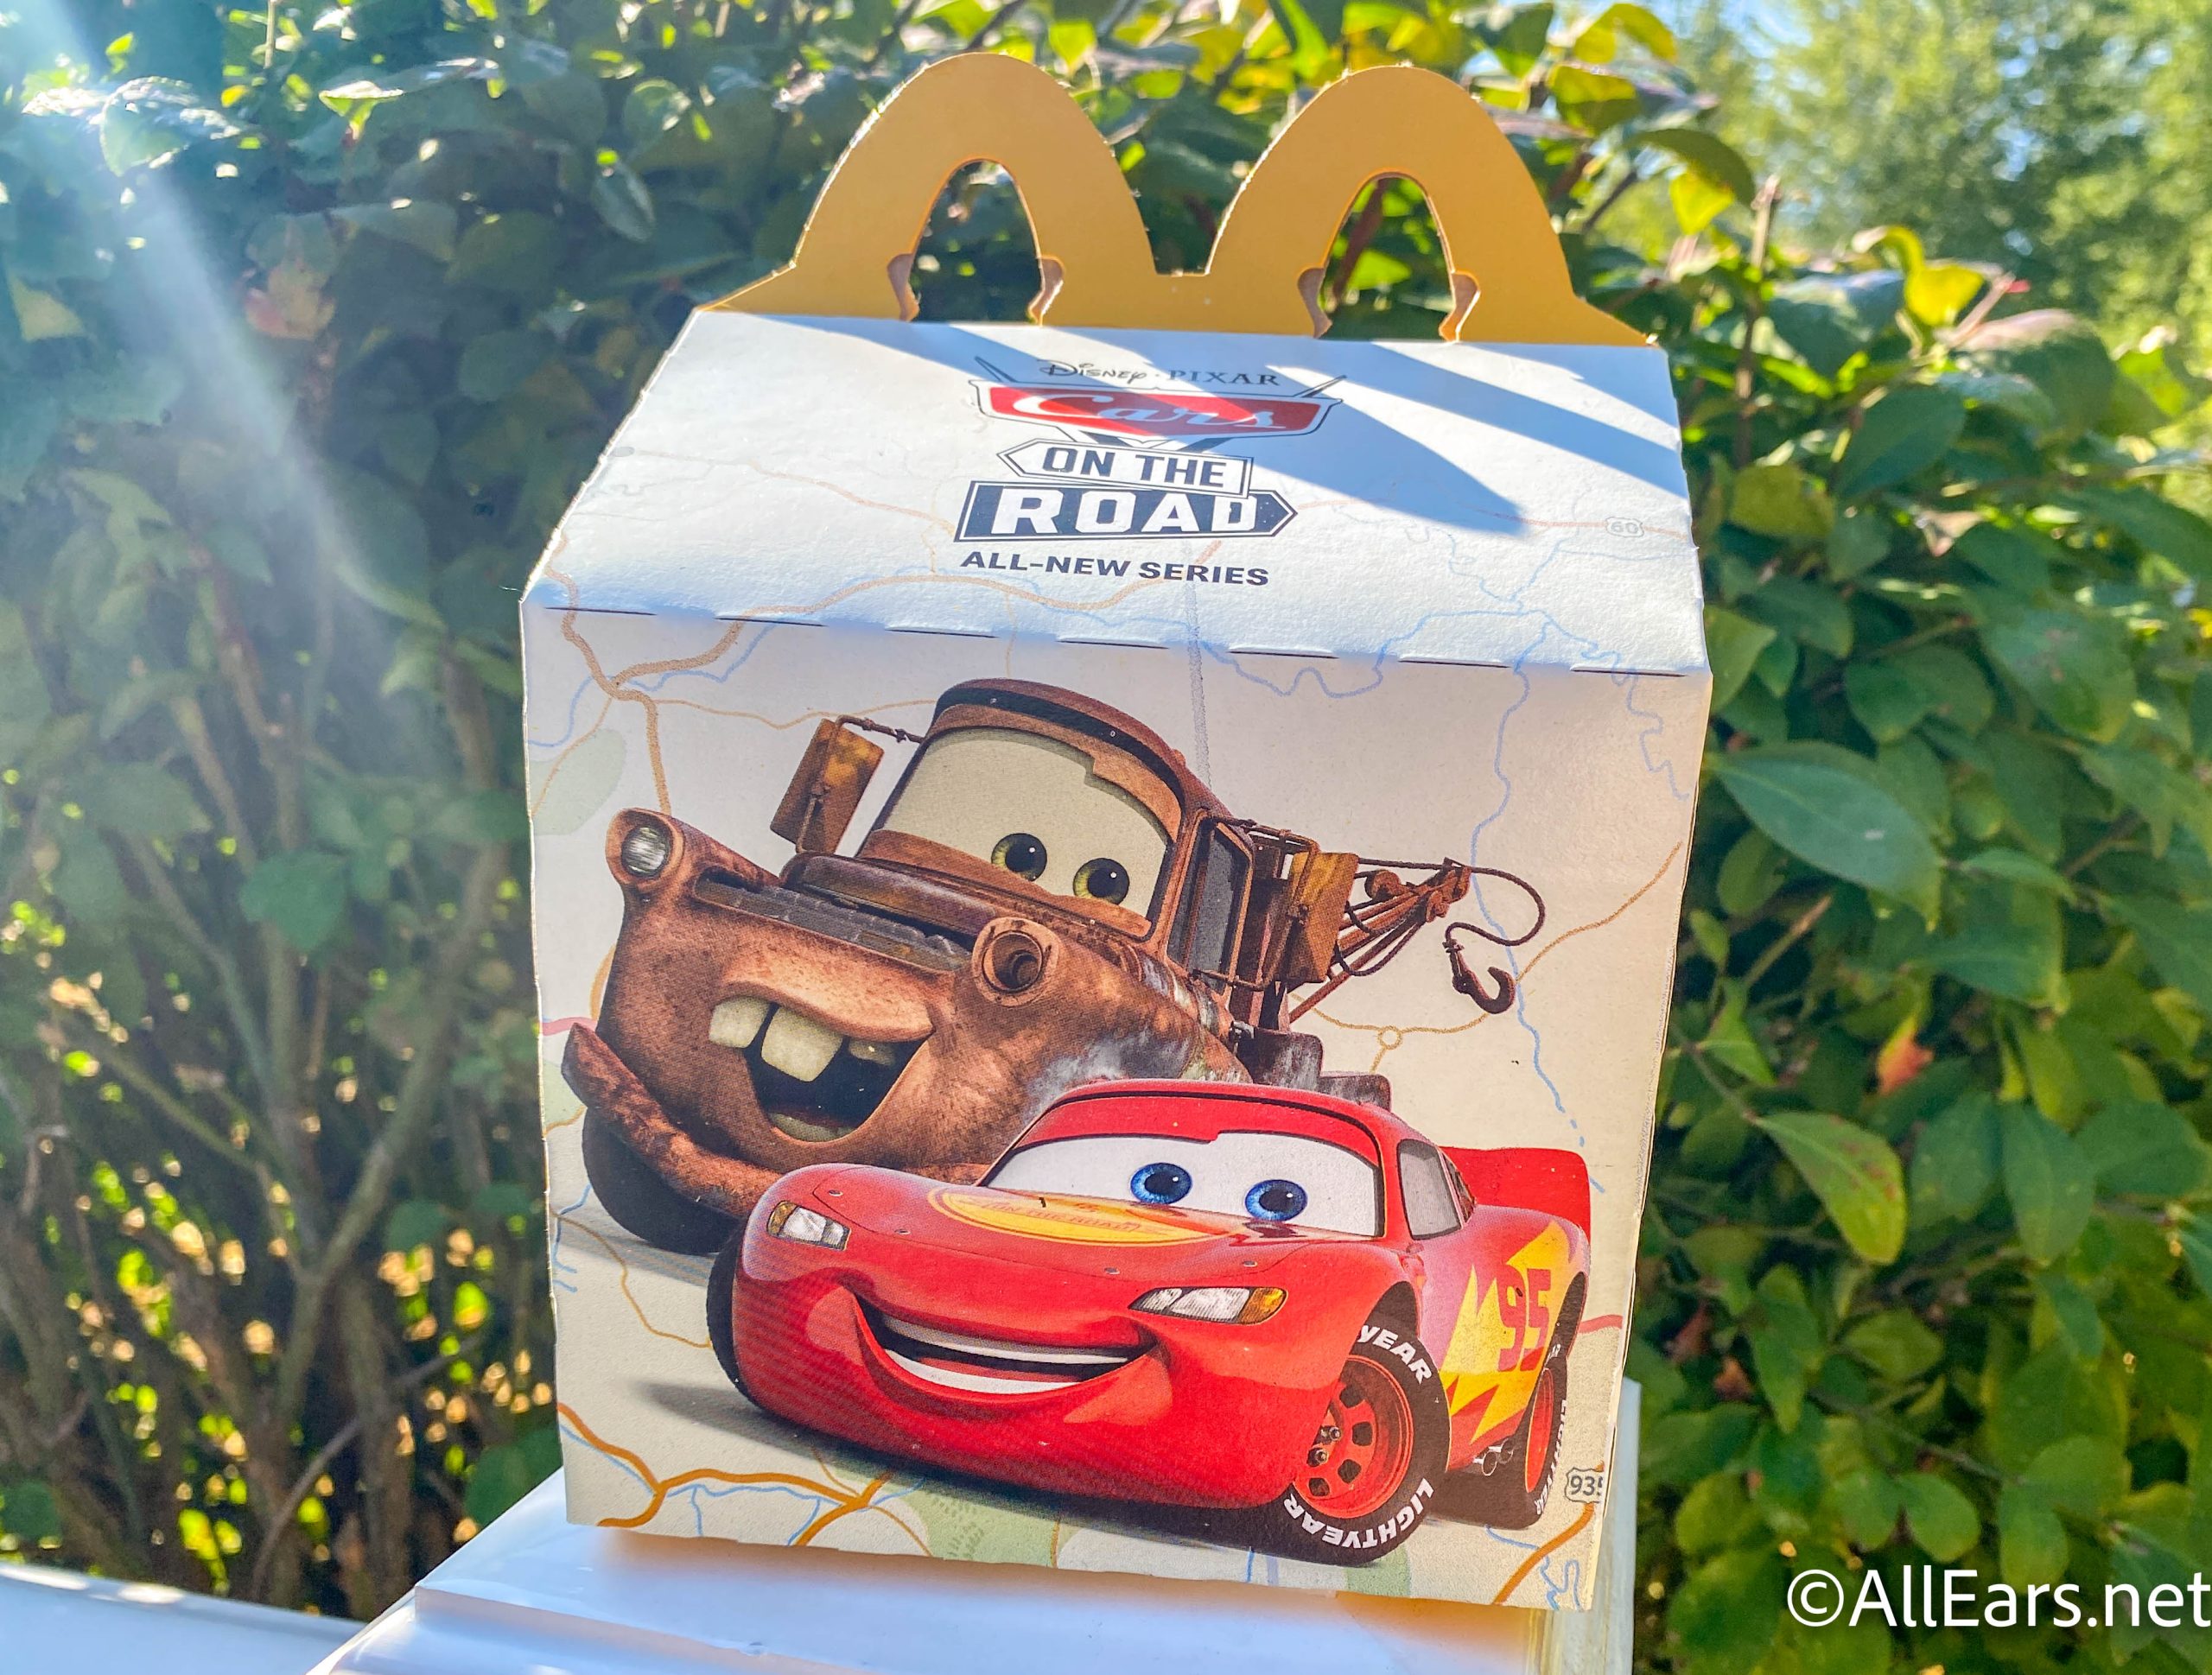 NEW 'Cars on the Road' Happy Meal Toys Now at McDonald's - AllEars.Net